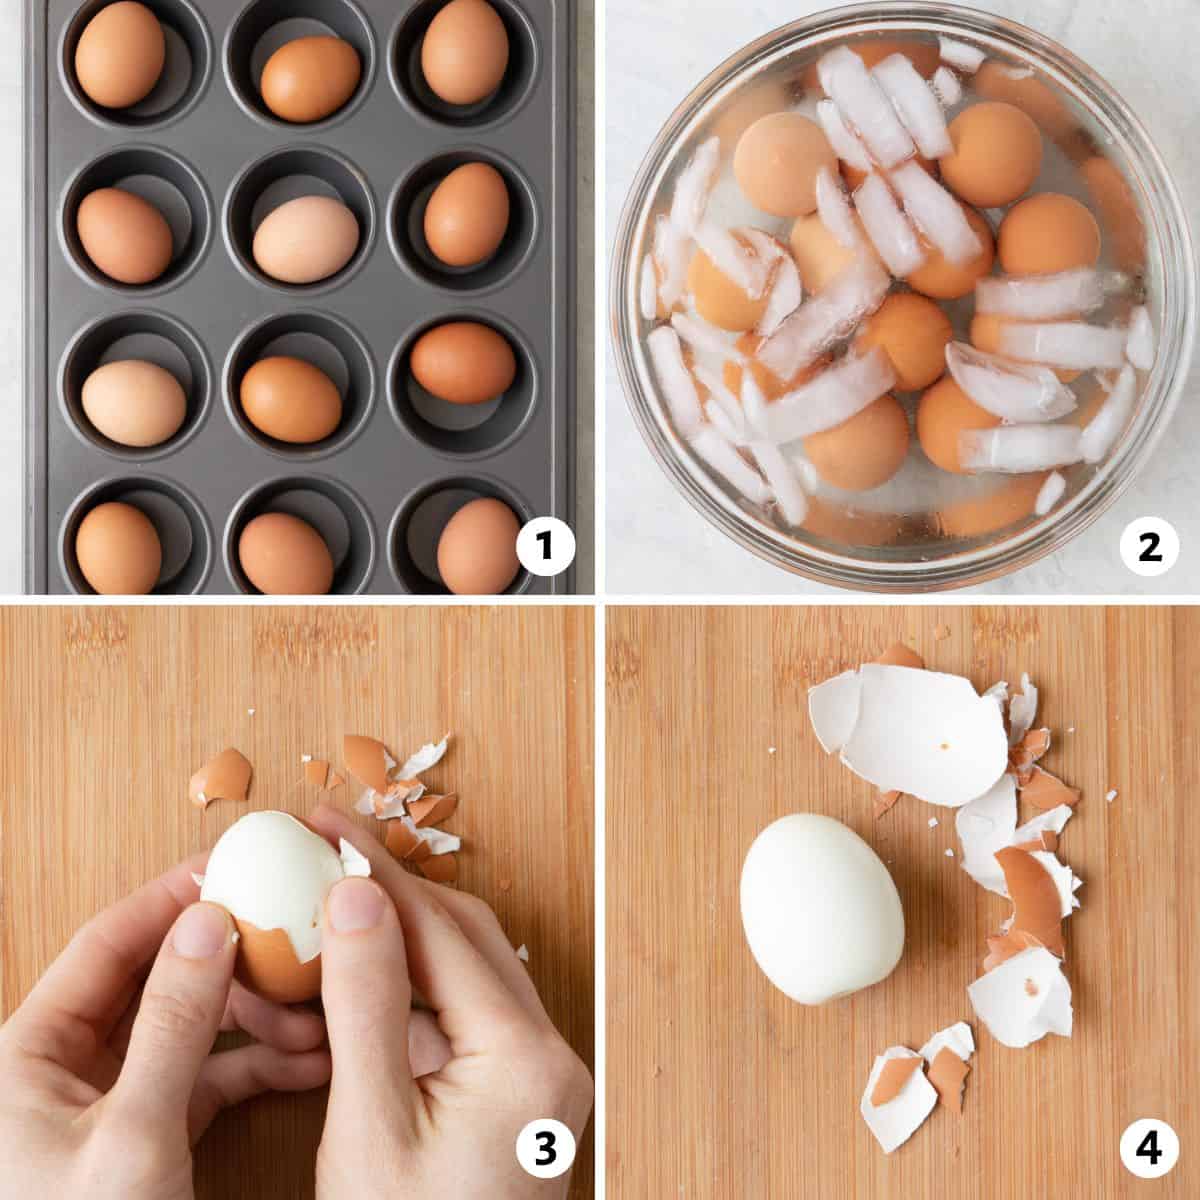 4 image collage making recipe: 1- eggs in a muffin pan before baking, 2- baked eggs in an ice bath, 3- peeling an egg, 3- egg after peeled on a cutting board with shell.